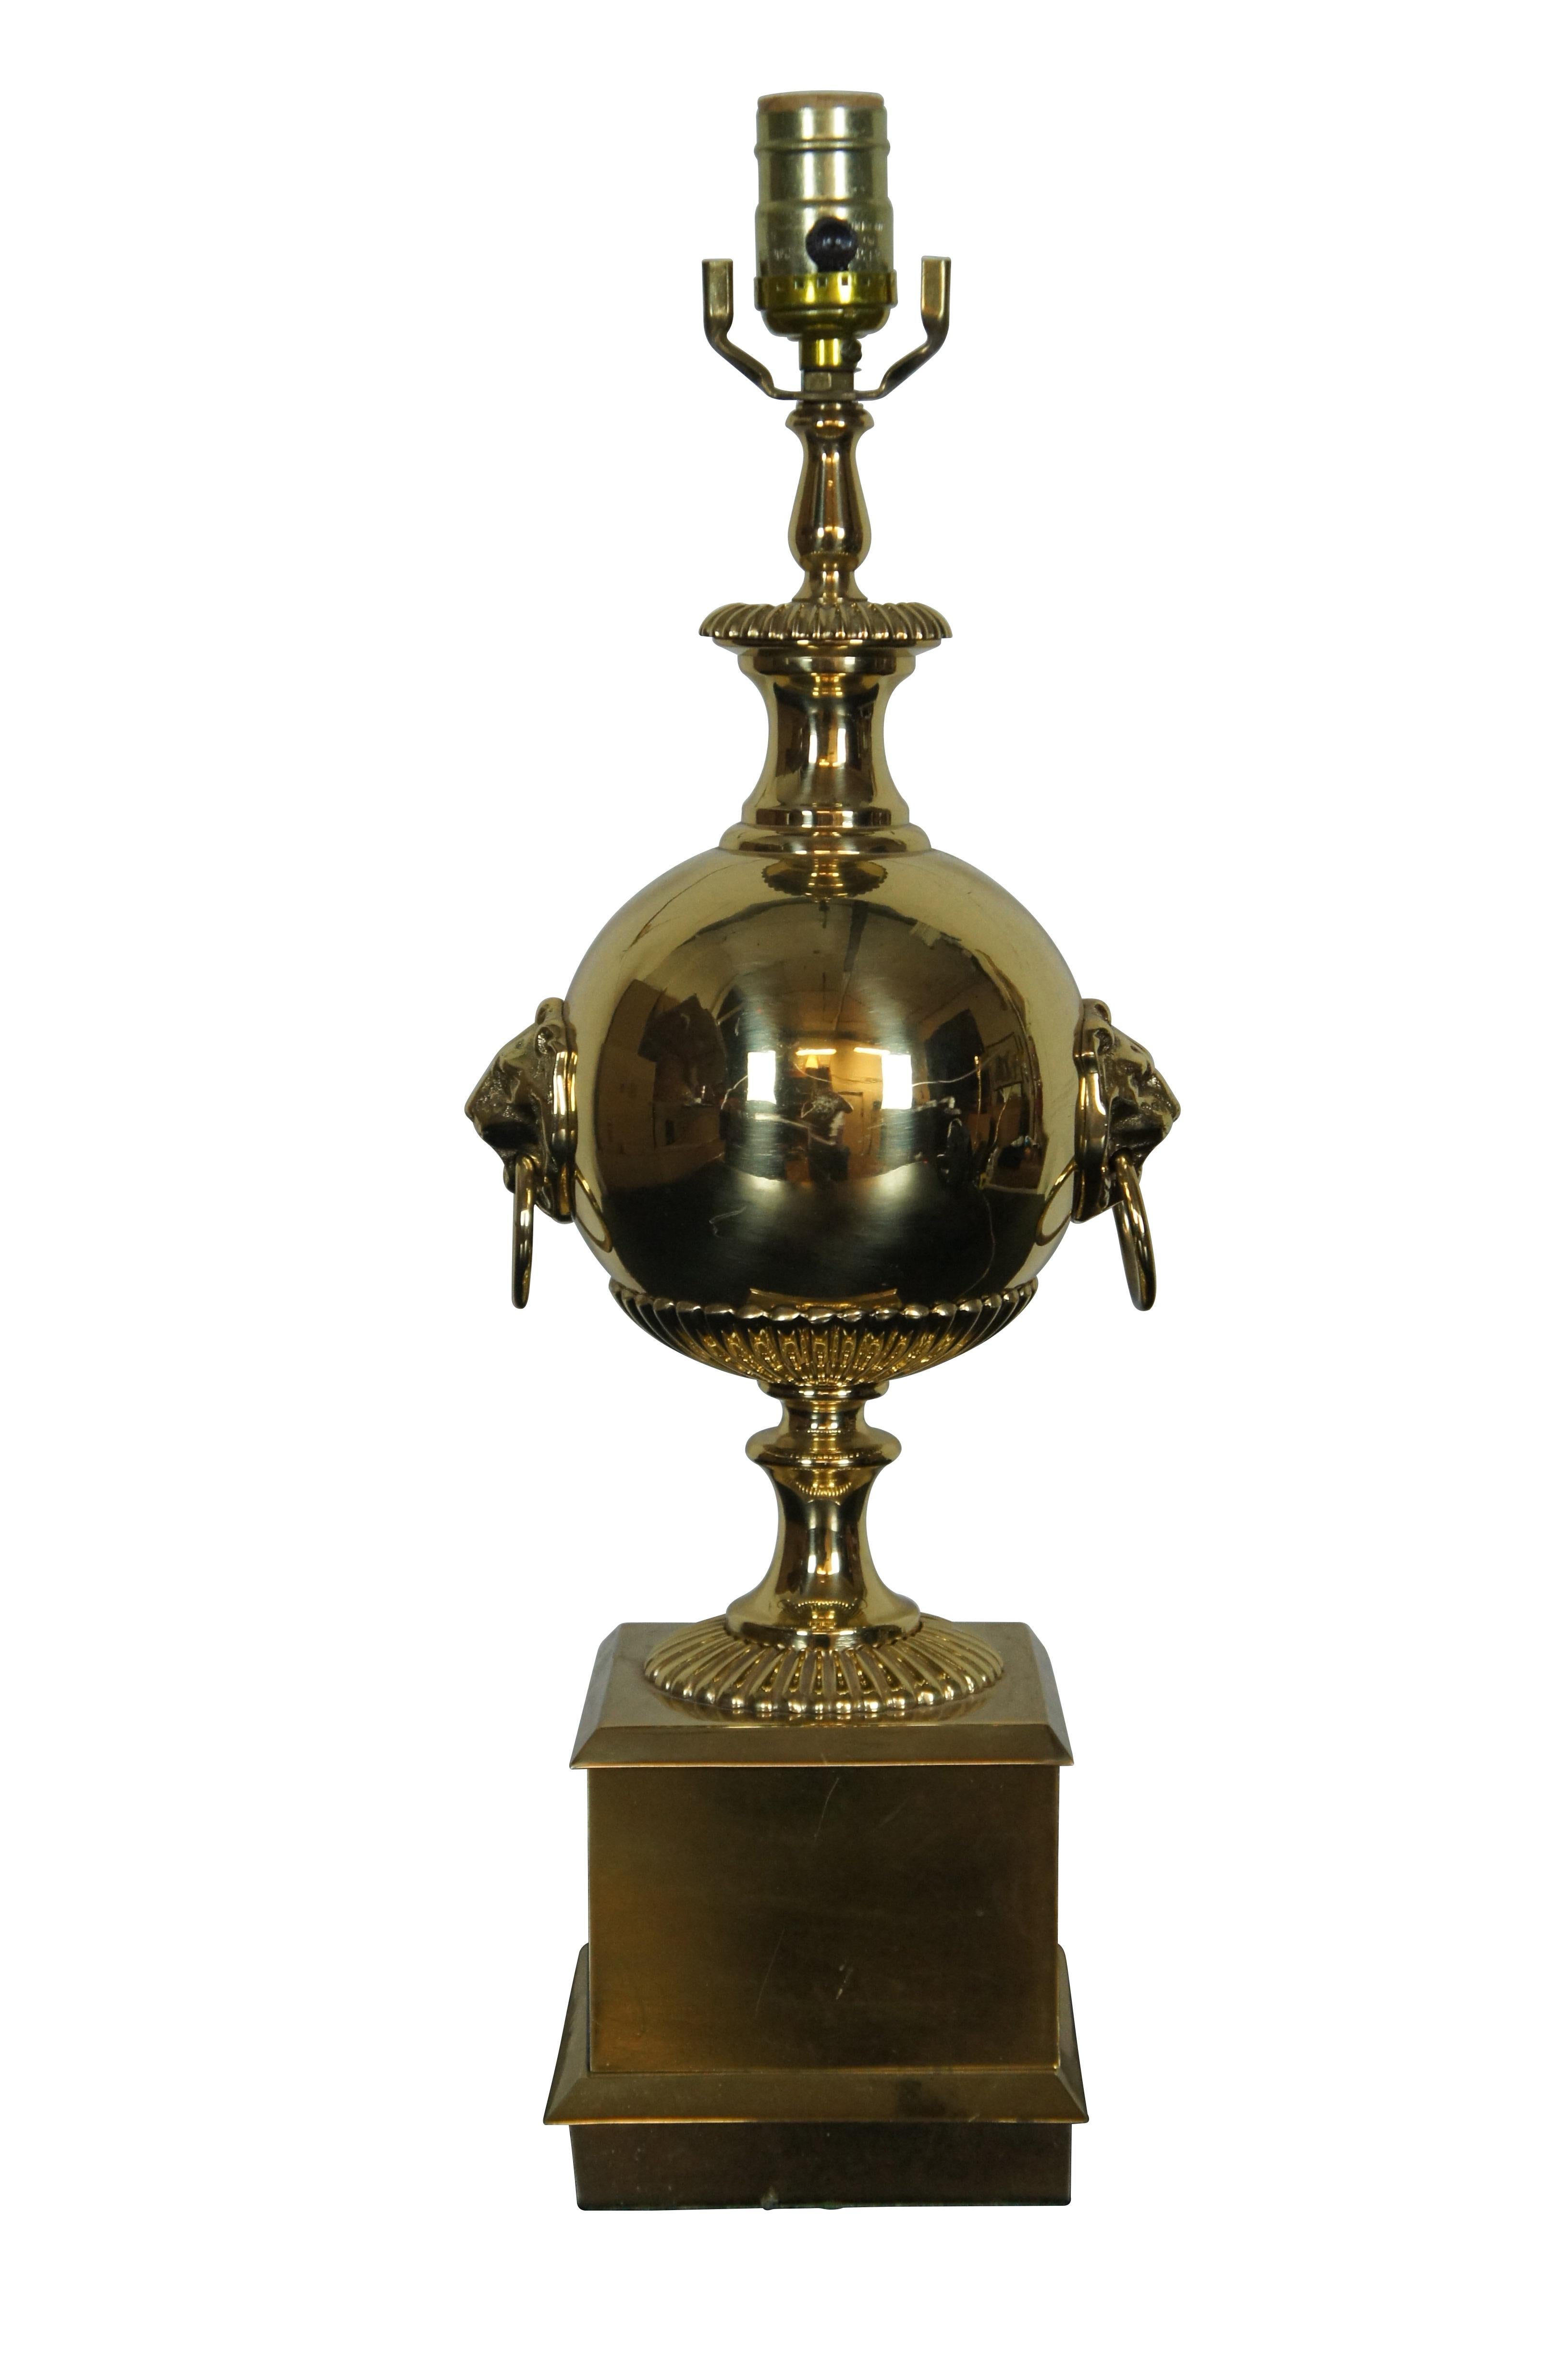 Vintage brass cannonball trophy lamp featuring round urn shaped body with lion head ring knockers and square pedestal base.

DIMENSIONS:
6” x 6” x 20.25” (Width x Depth x Height)